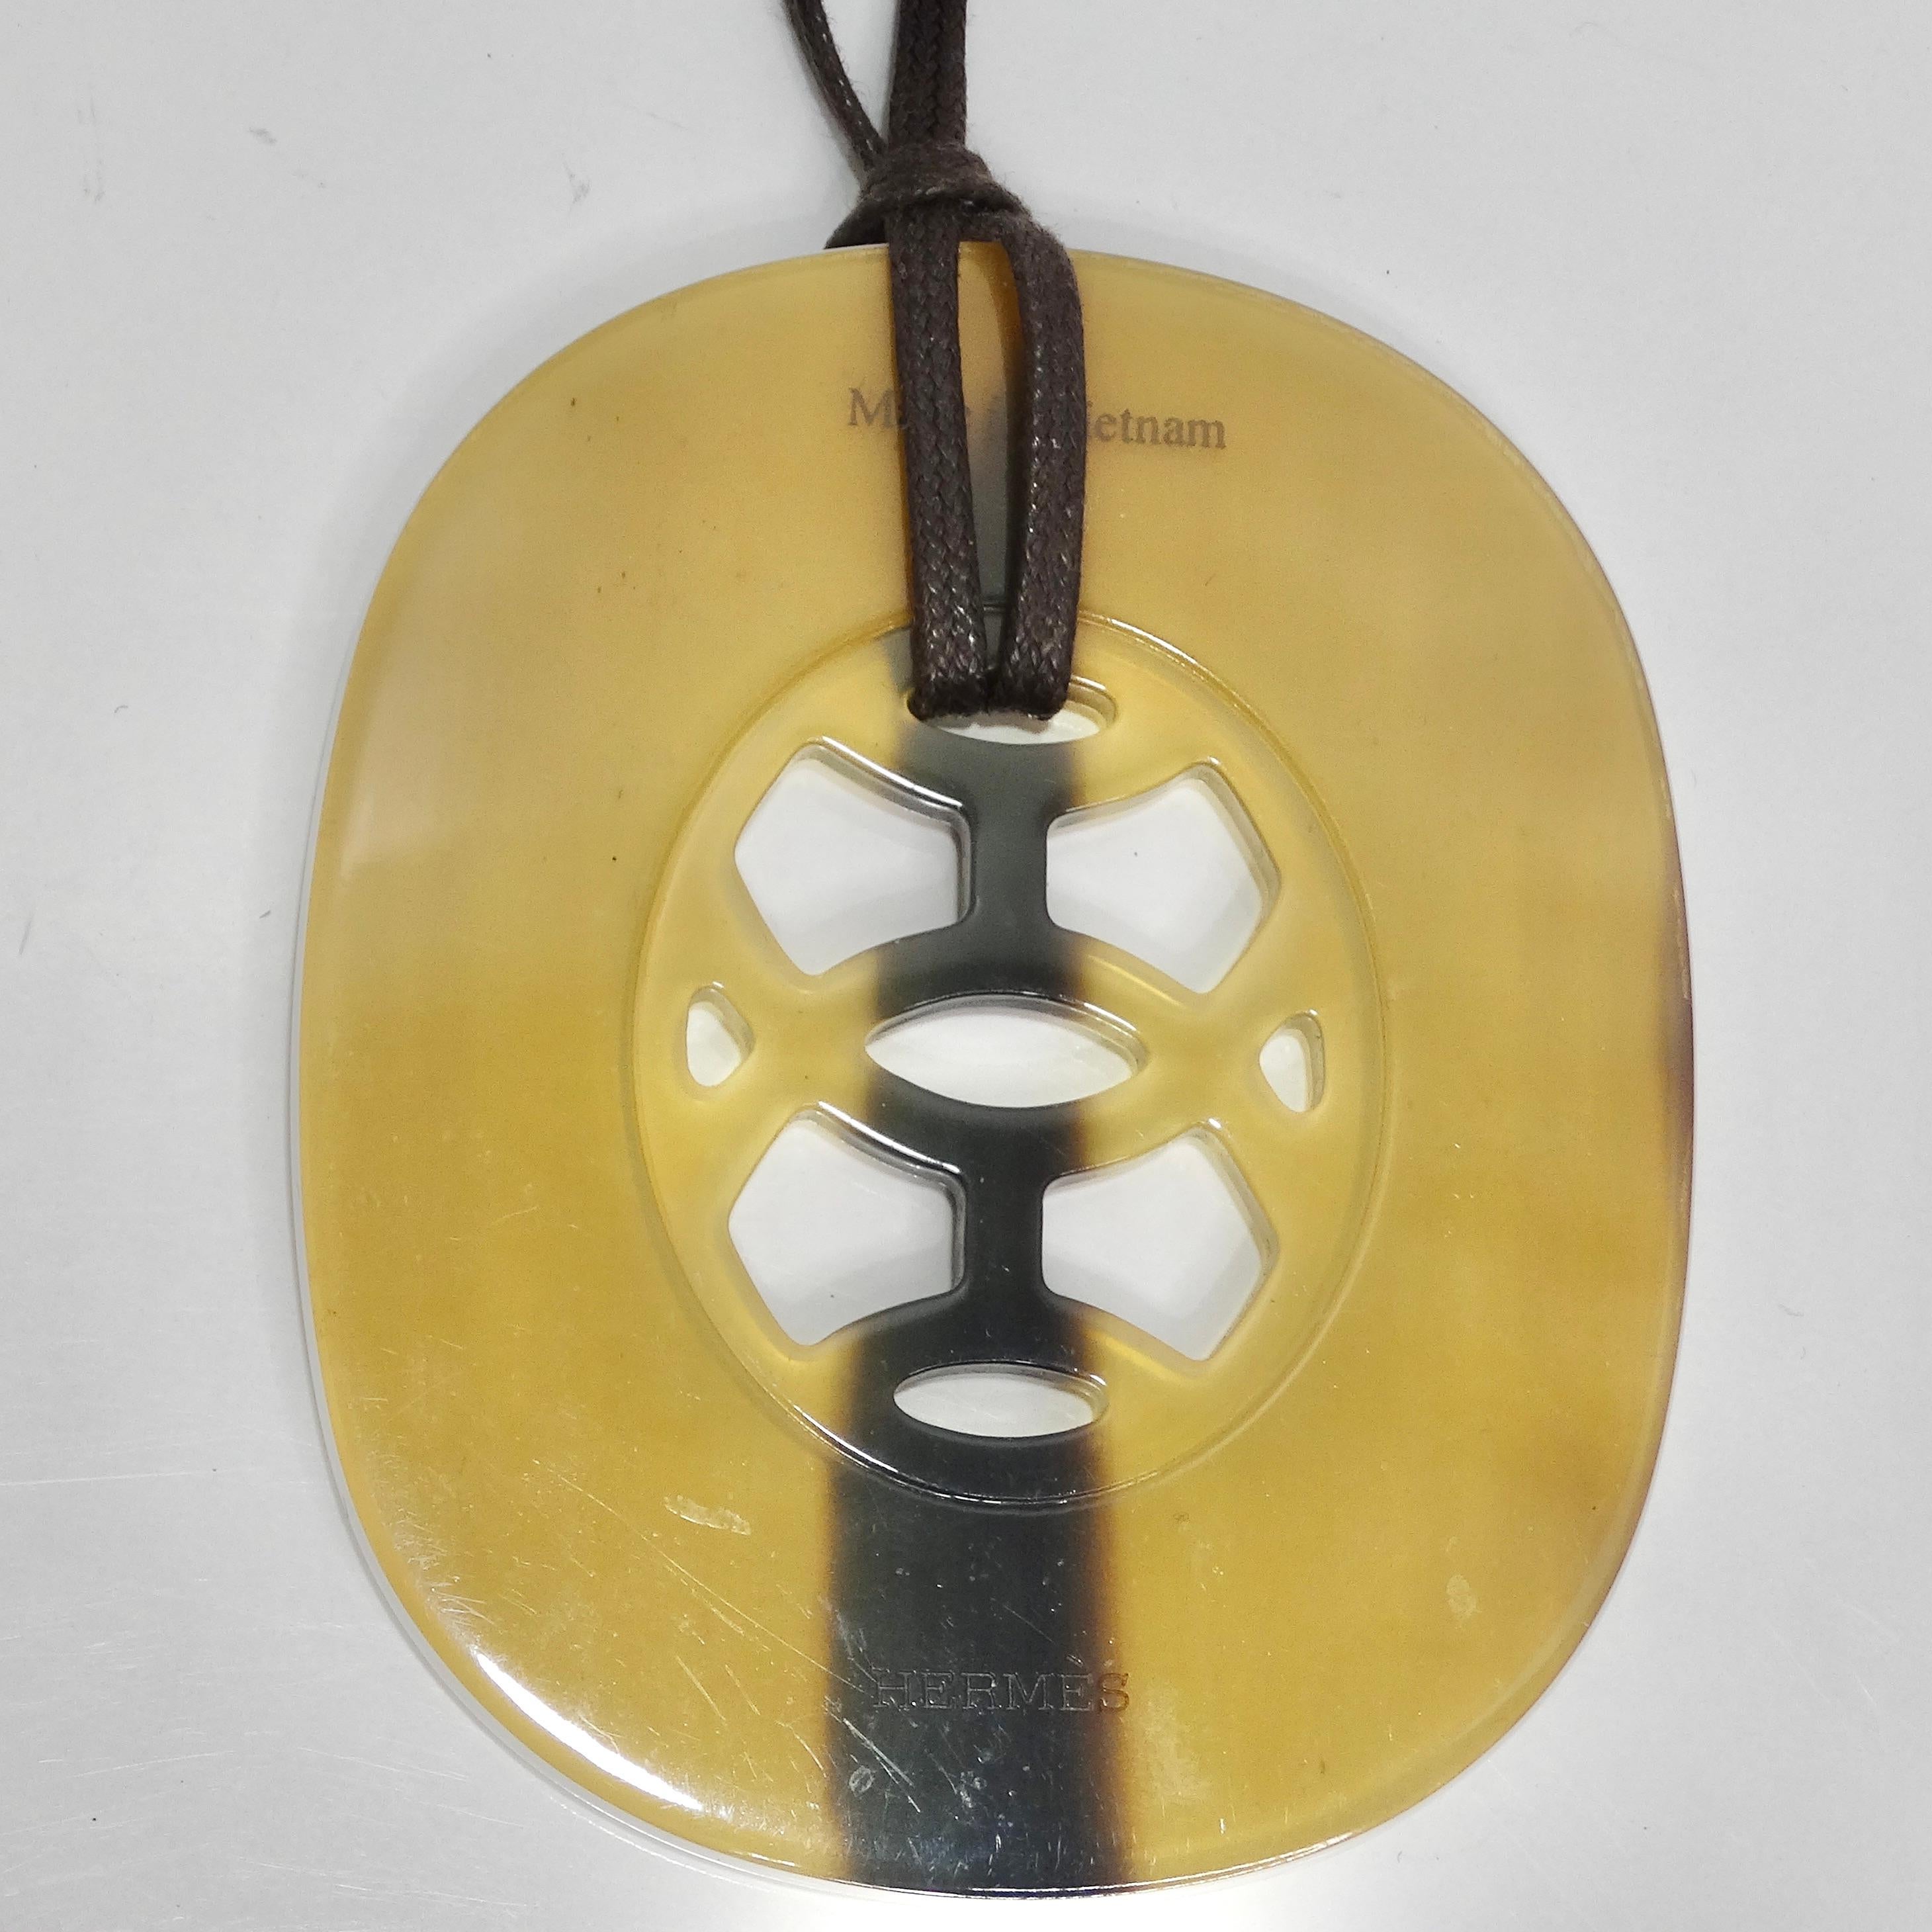 Hermes Buffalo Horn Lacquer Lift Necklace In Good Condition For Sale In Scottsdale, AZ